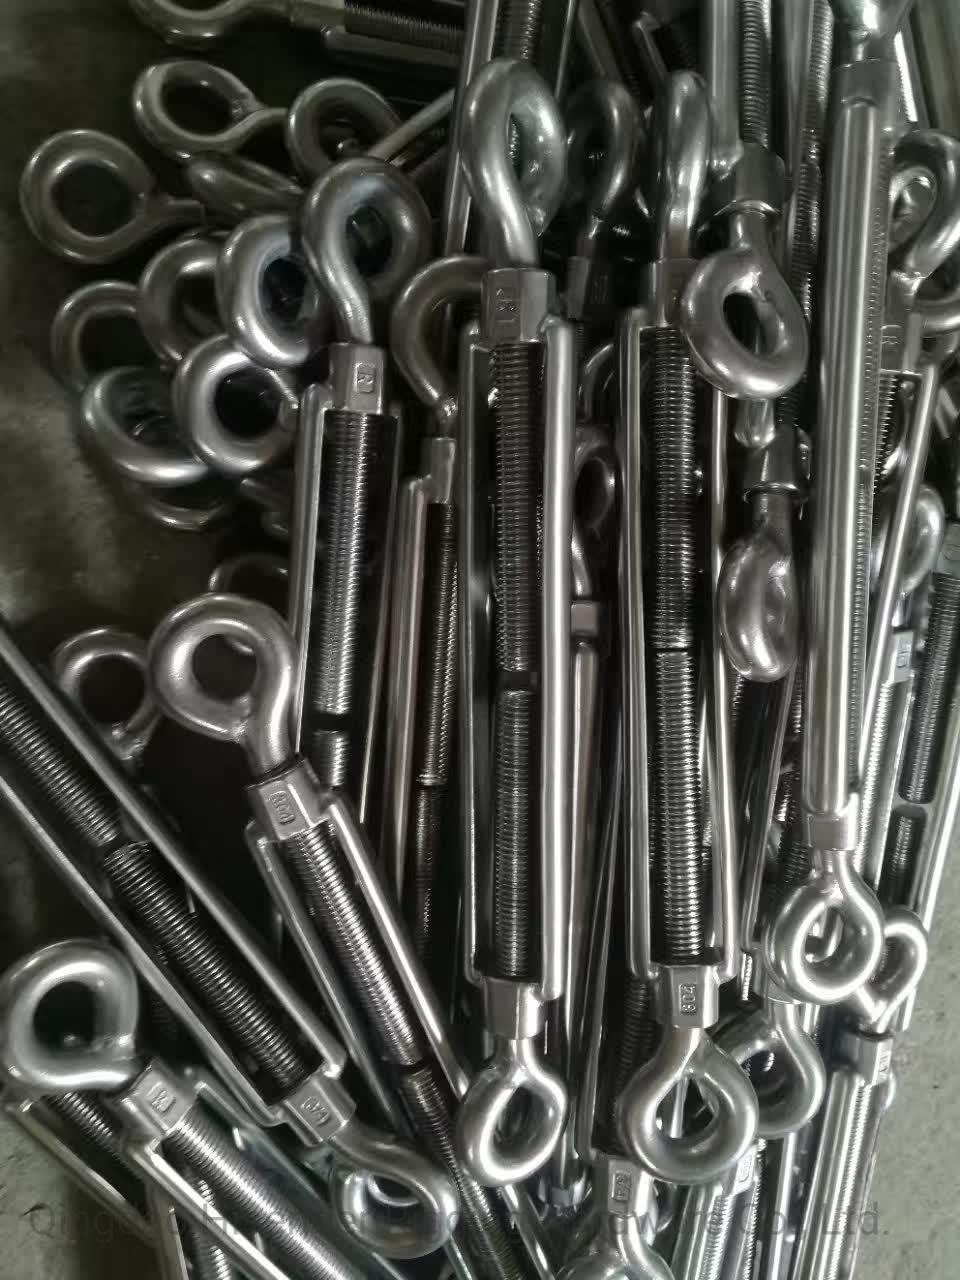 Ss316, Ss304 Turnbuckle, European Type Frame Commercial, JIS Fame, Us Forged, Korea Type, DIN1480, DIN1478, Us Type Forged Turnbuckle